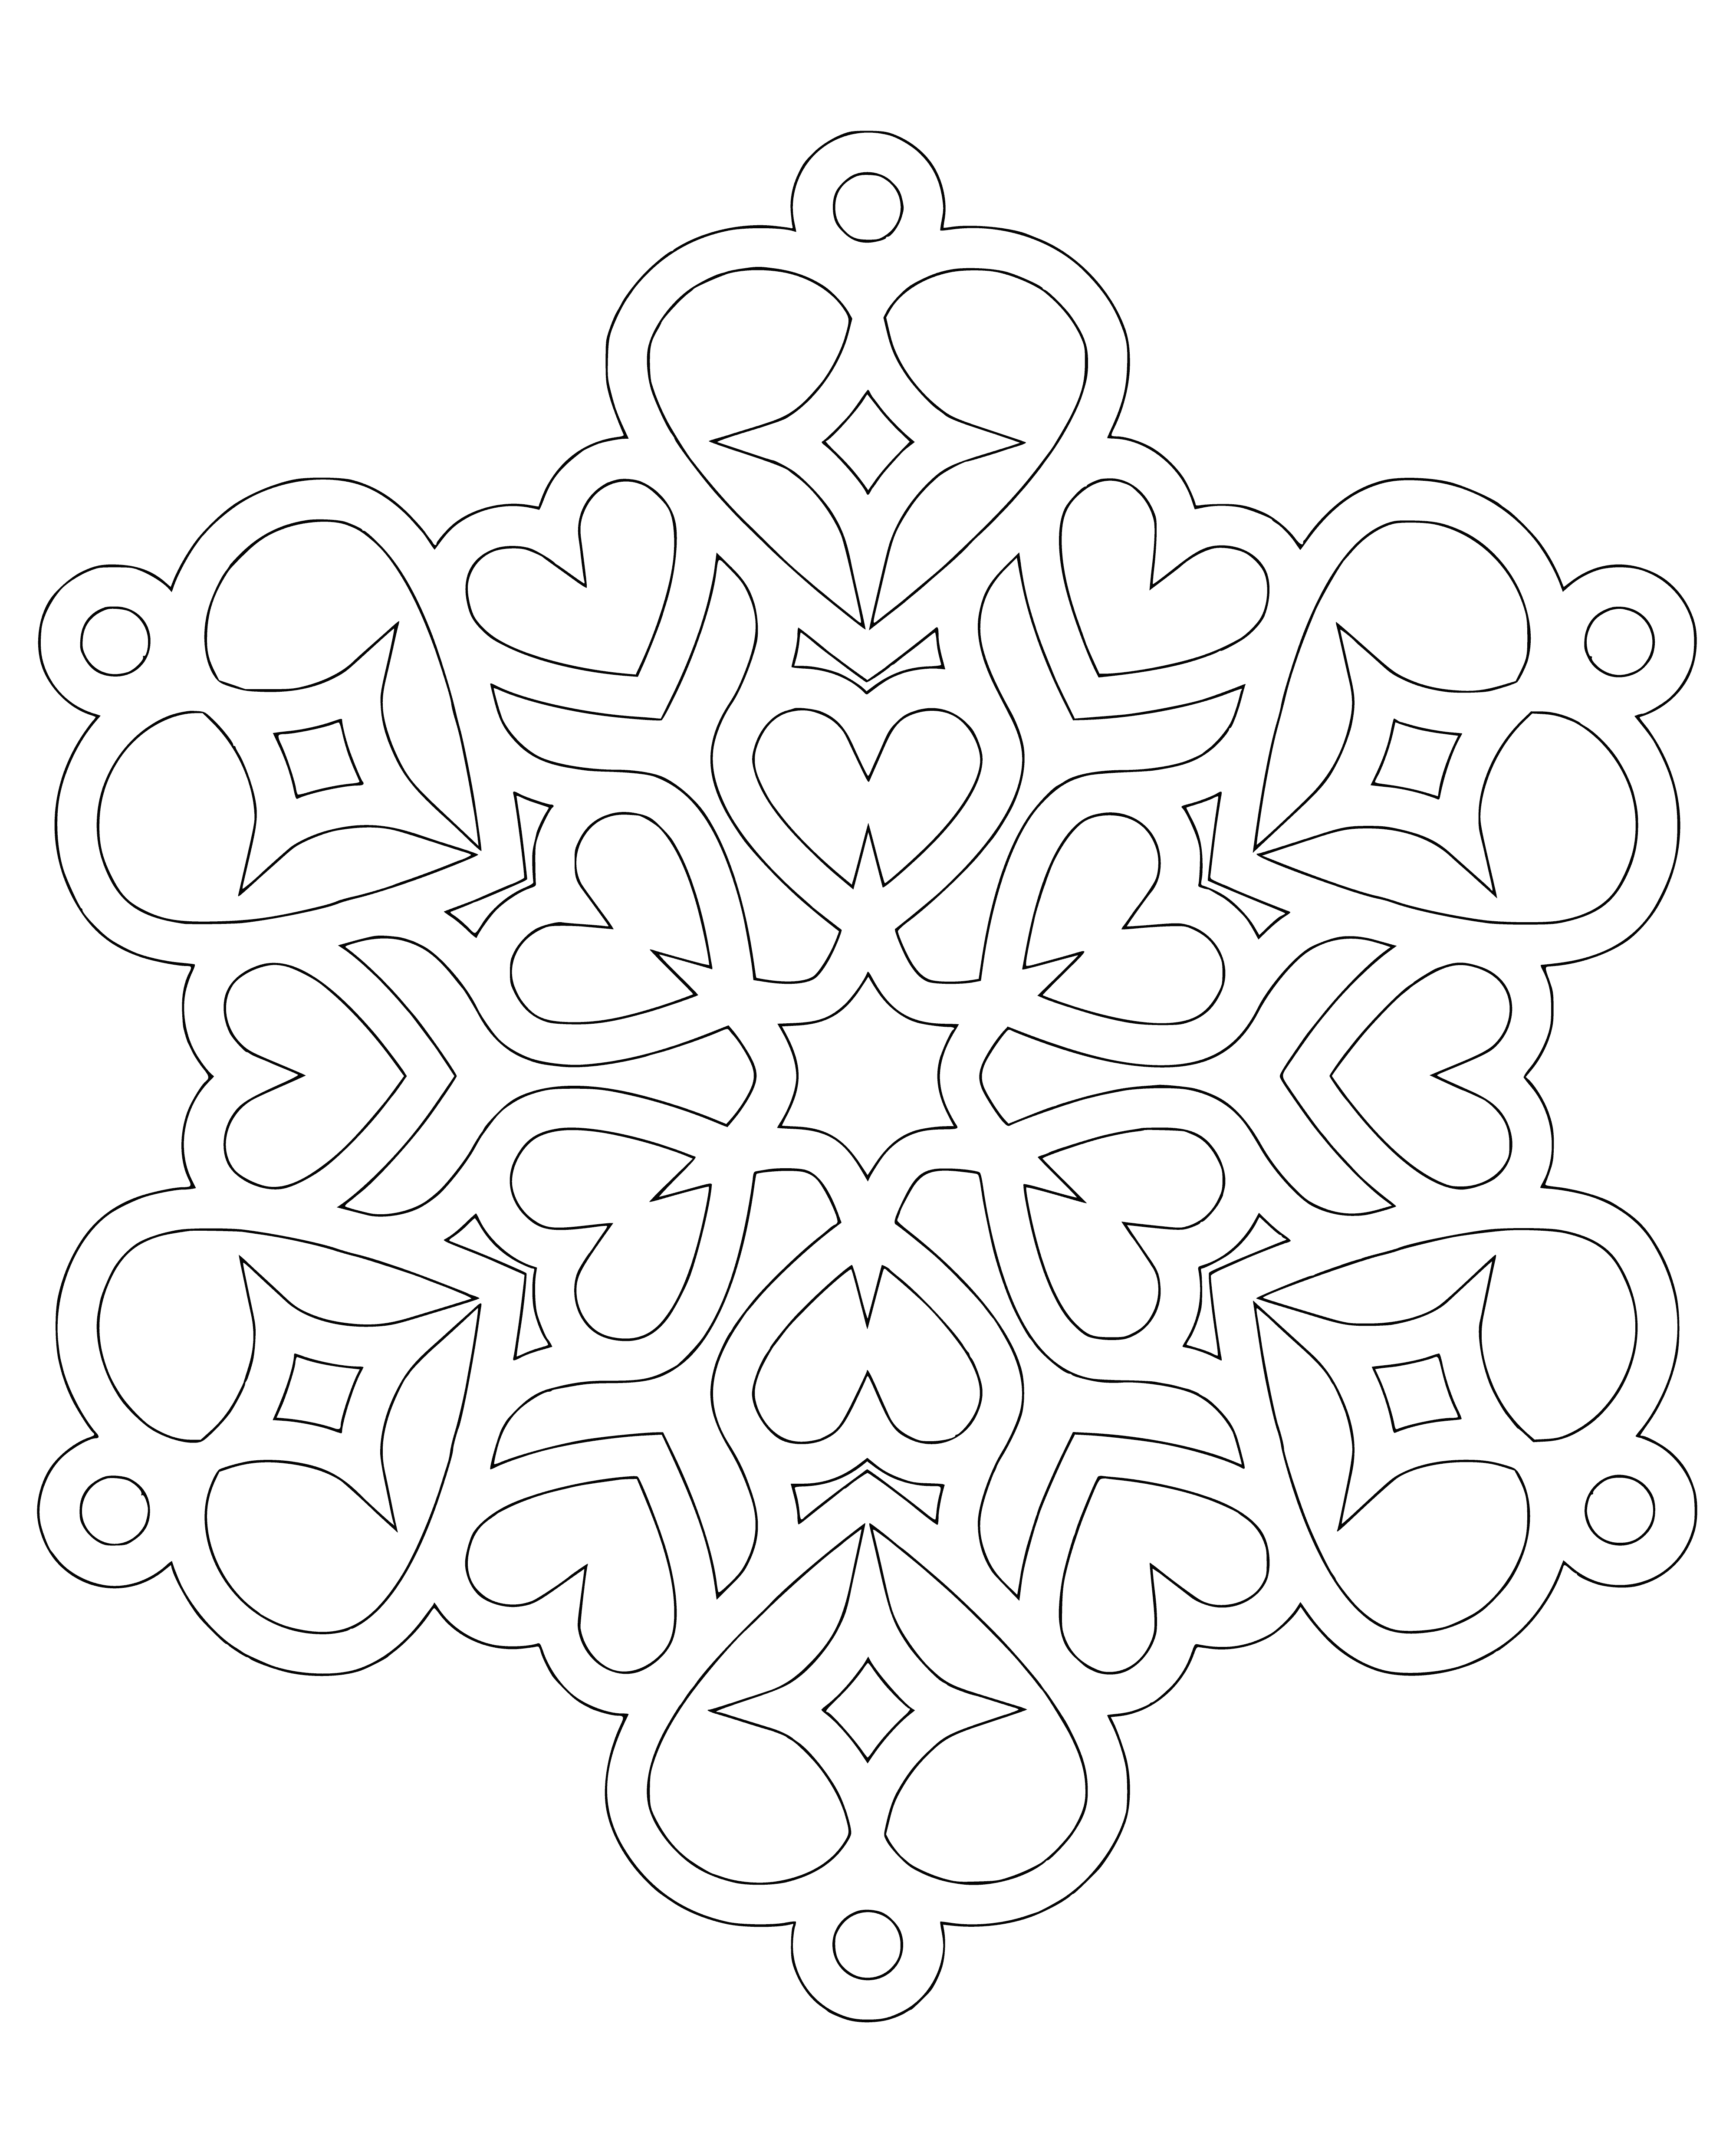 coloring page: A red heart sits surrounded by snowflakes in the center of a beautiful winter scene.